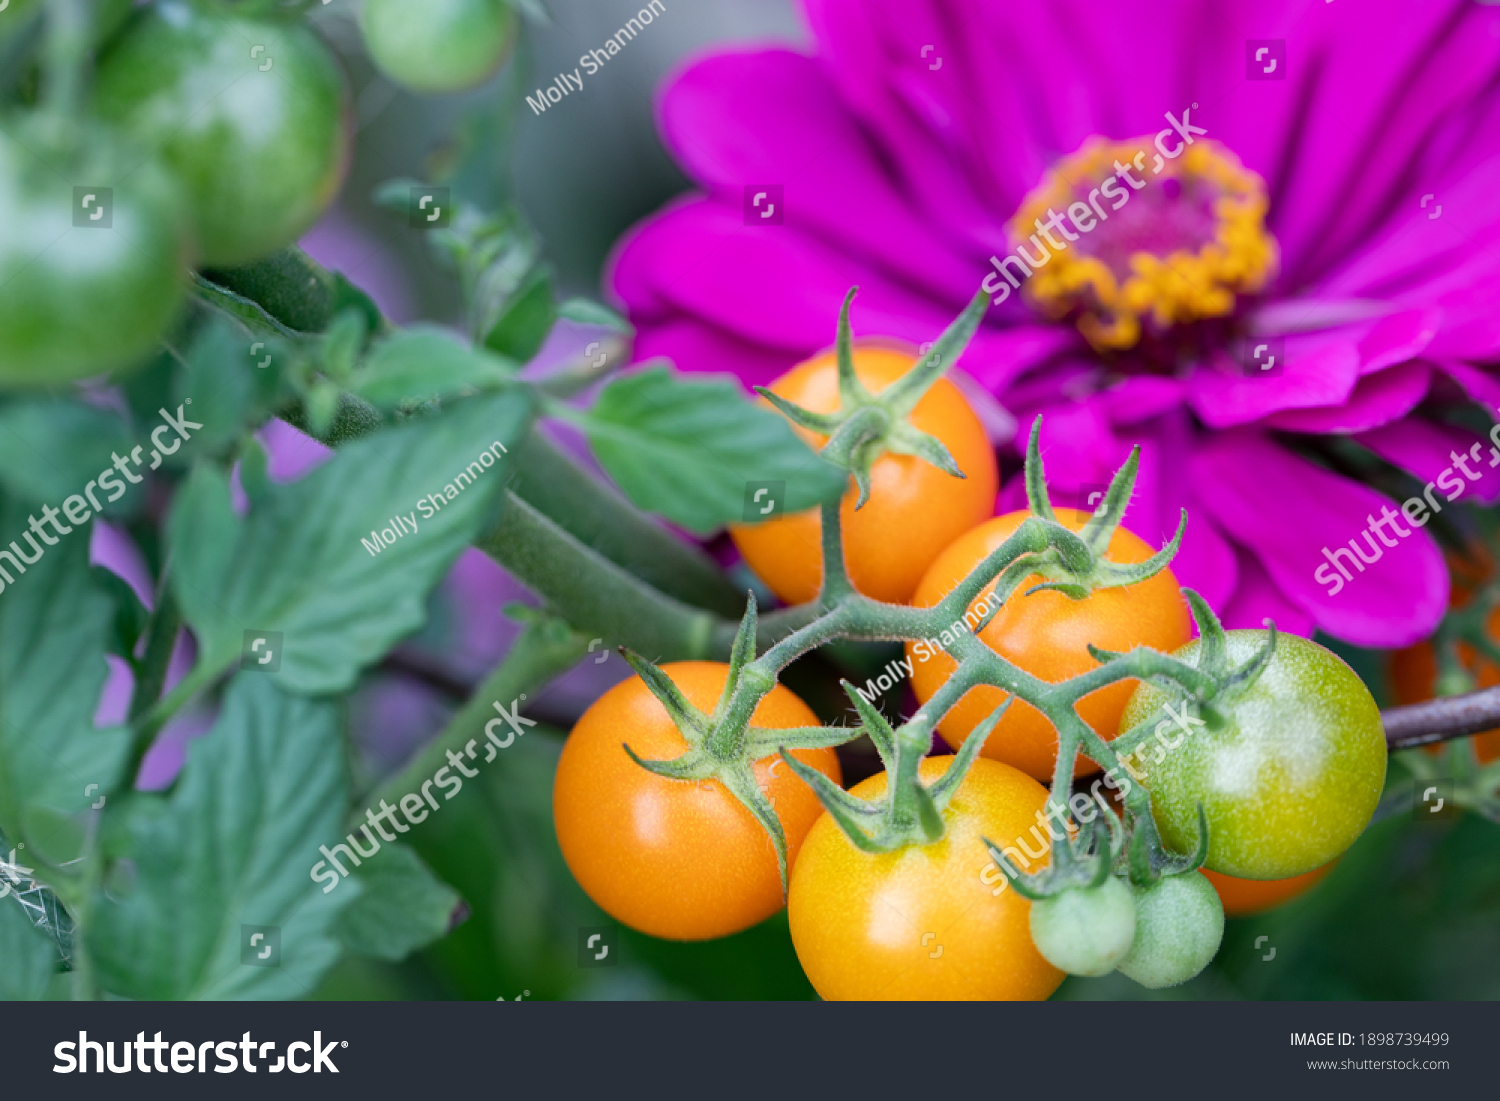 Companion planting of amethyst zinnia with sun gold cherry tomatoes are a perfect combination. Zinnias deter cucumber beetles and tomato worms. They attract predatory wasps and hover flies. #1898739499